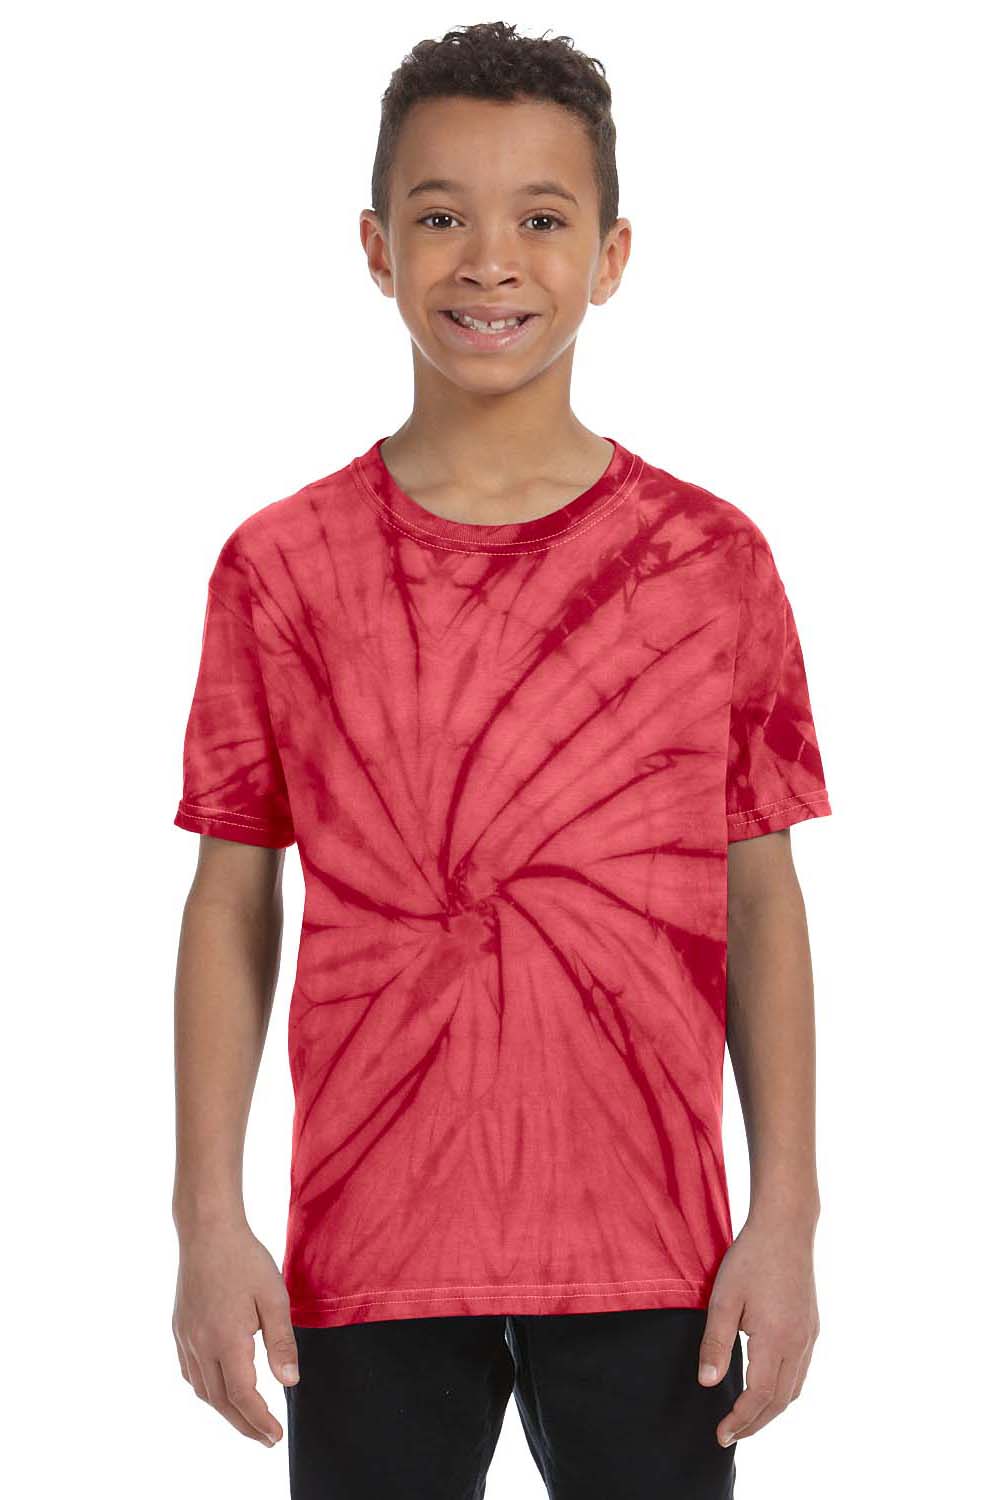 Tie-Dye CD101Y Youth Short Sleeve Crewneck T-Shirt Red Front